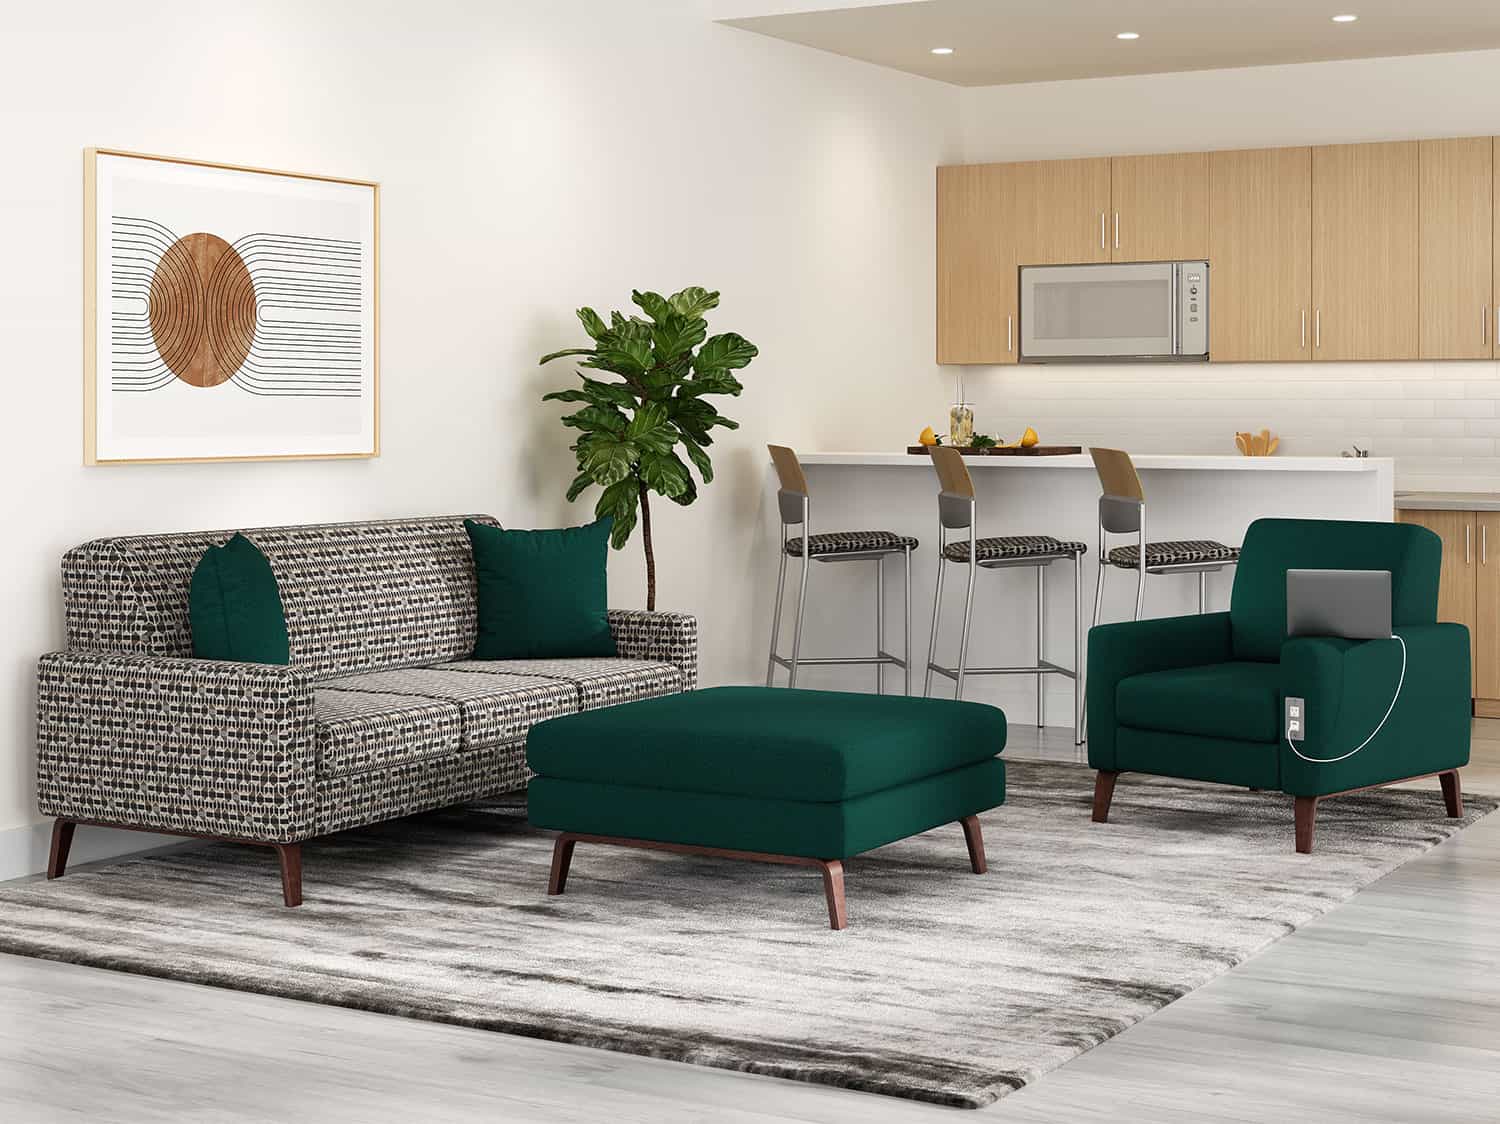 Campus apartment with student furniture including Chill Sofa, Upholstered Ottoman, and Chair with Power Option for charging.